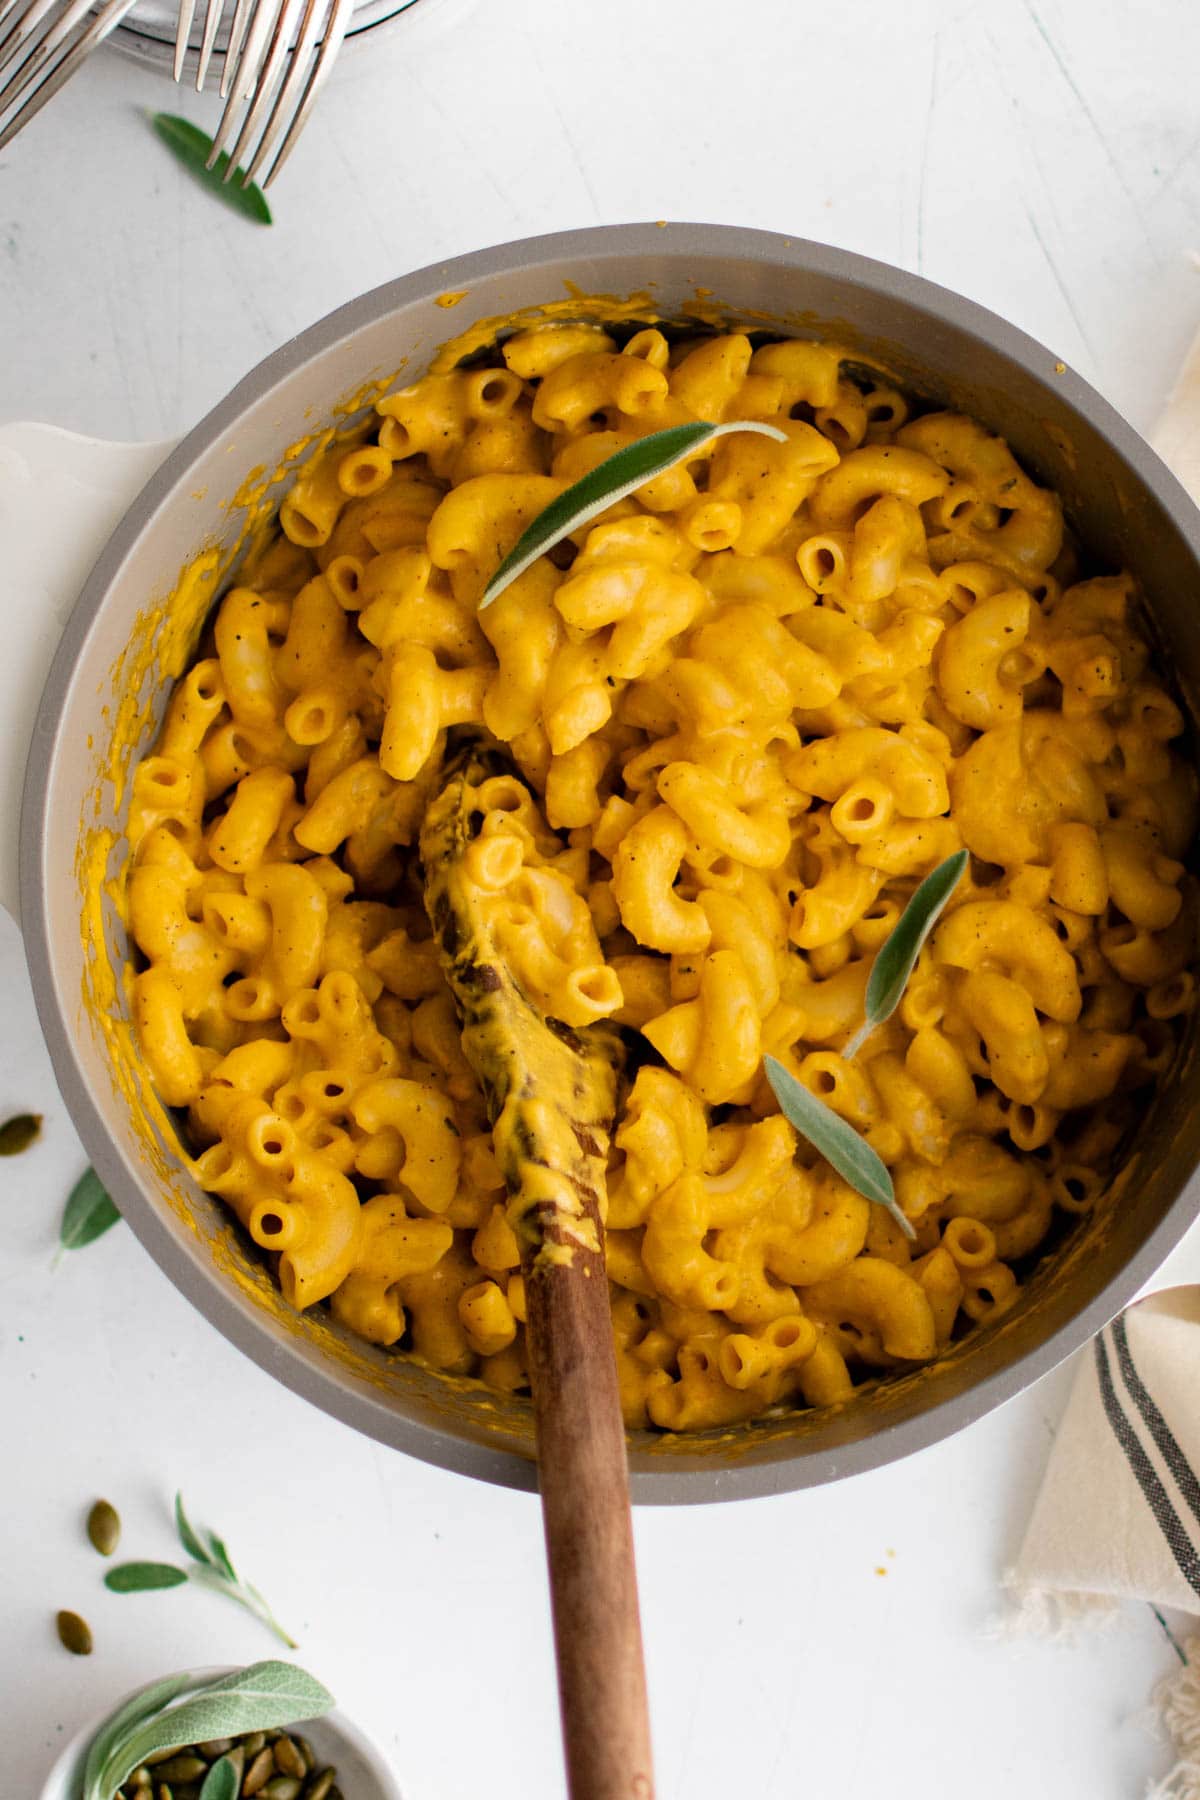 Pot with macaroni in an orange sauce with fresh sage leaves.